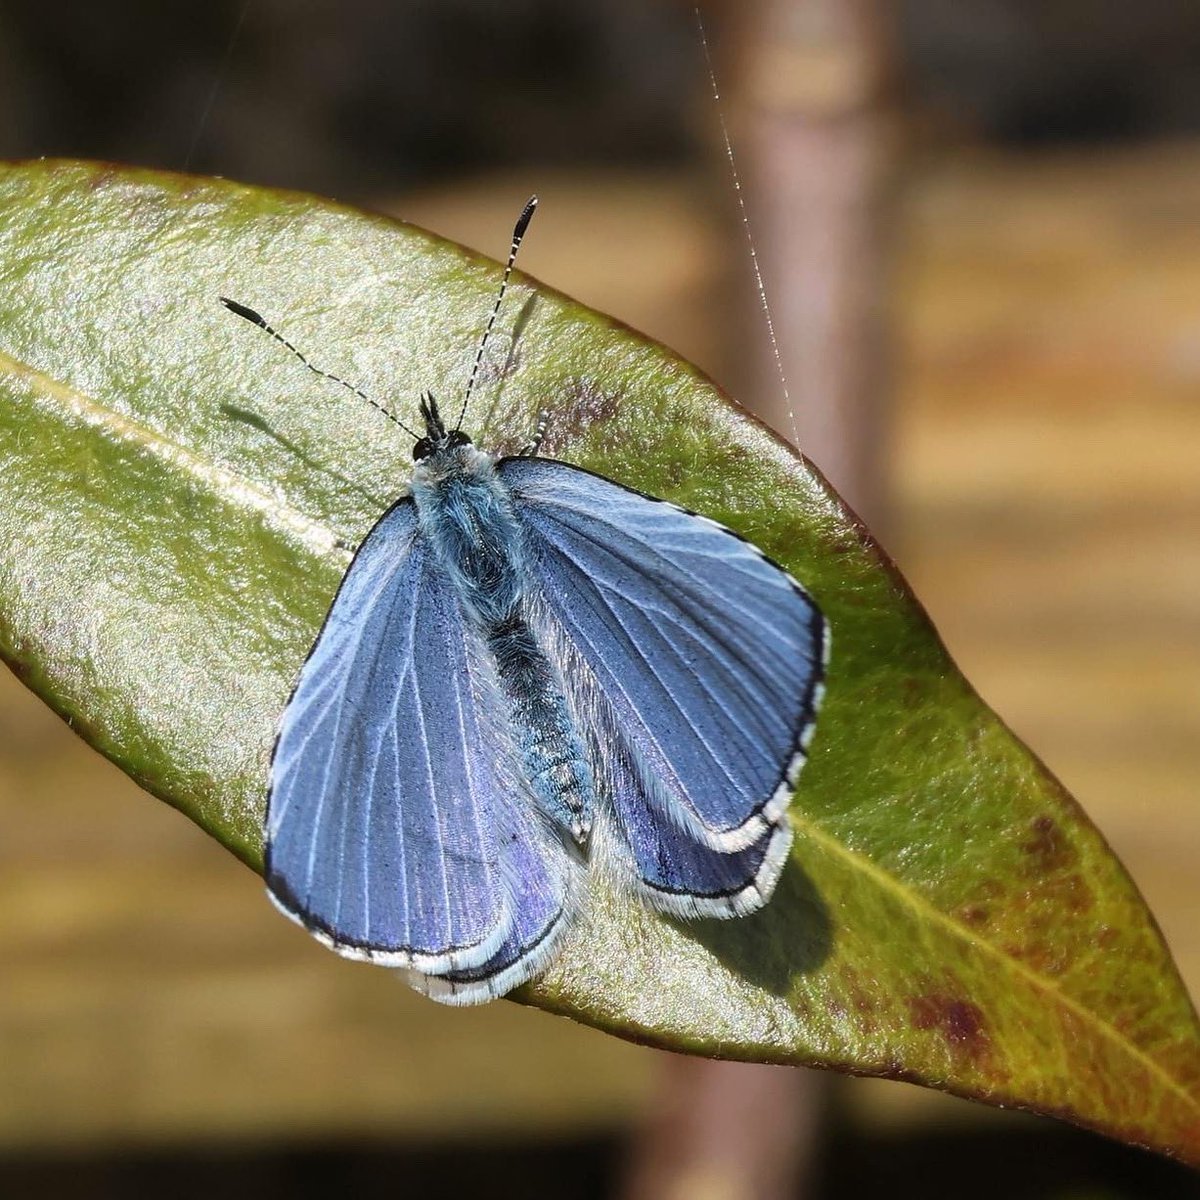 A beautiful Holly Blue from our garden today. @savebutterflies @BiodCon_ie @BioDataCentre @nore_vision @Irishwildlife @WebsWild @kilkennyweather